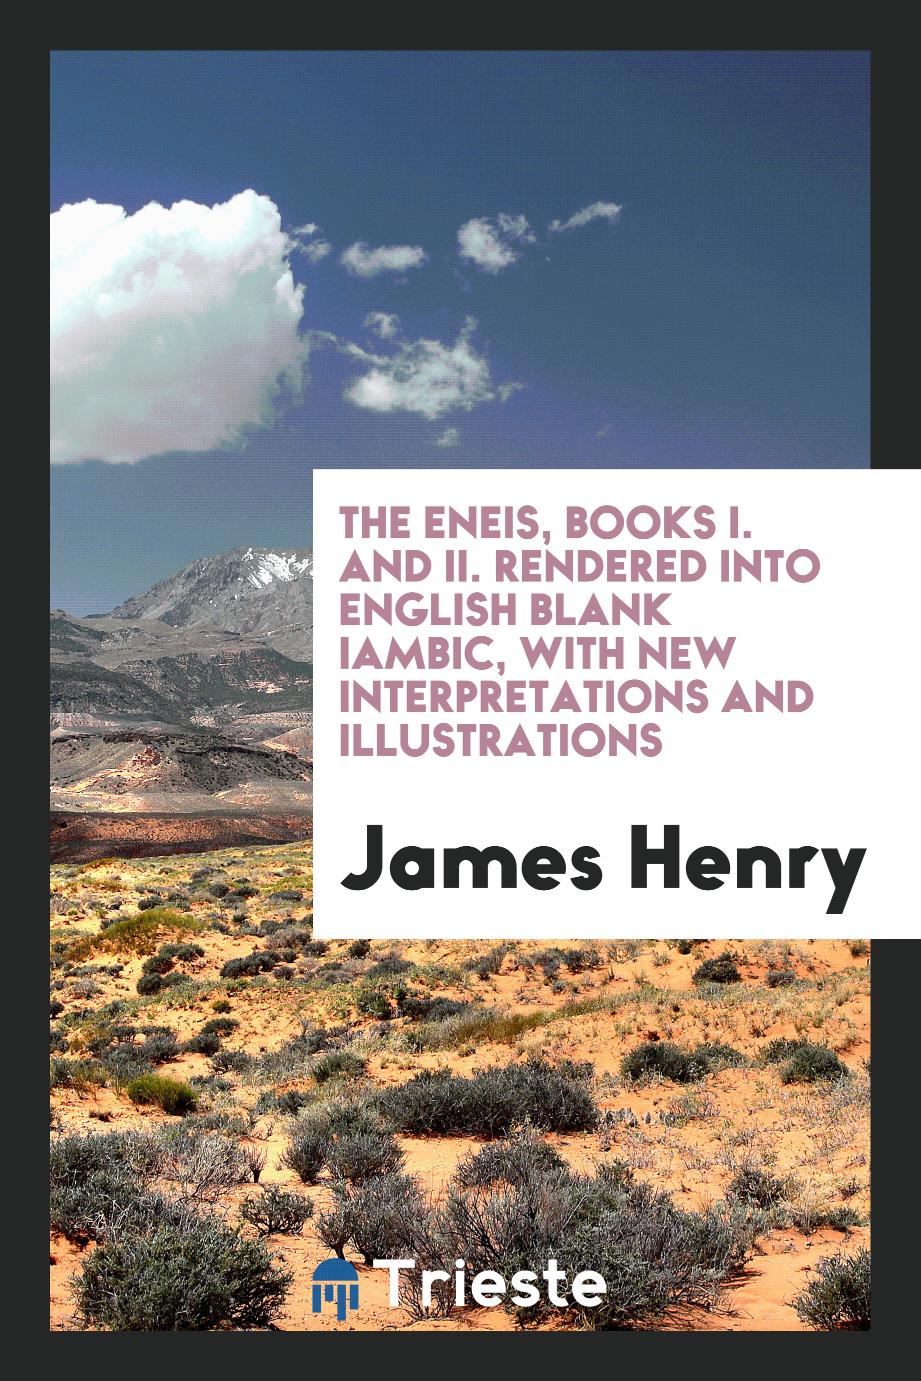 The Eneis, Books I. and II. Rendered Into English Blank Iambic, with New Interpretations and Illustrations